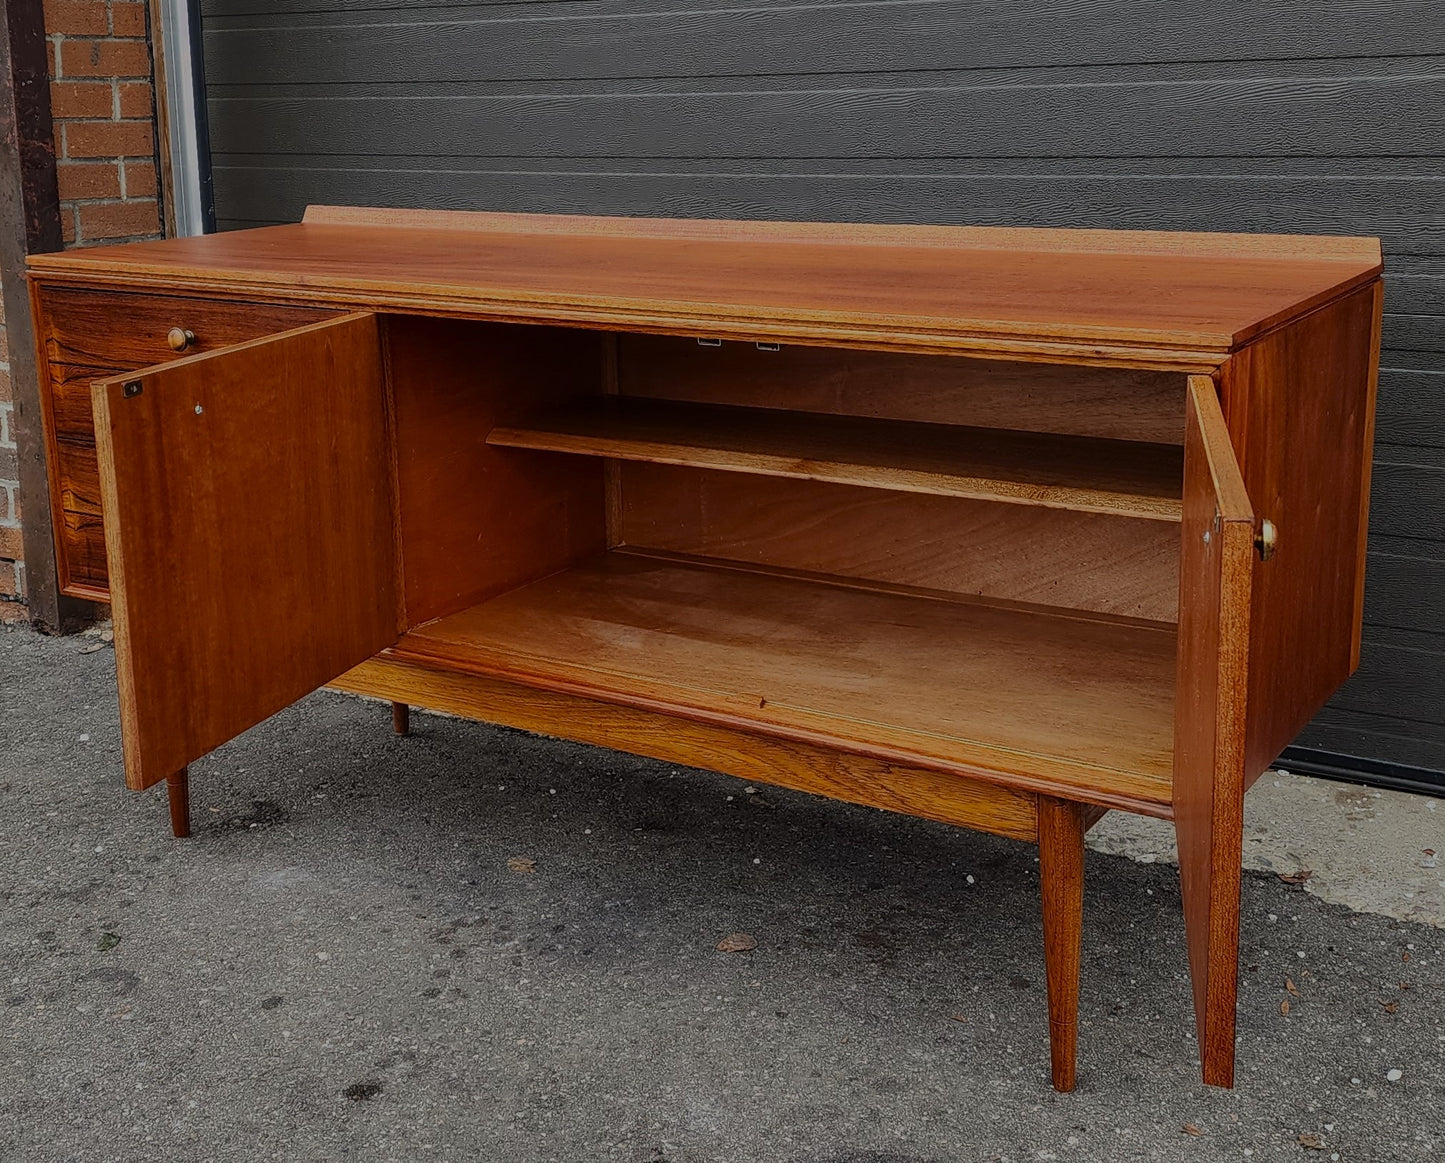 REFINISHED MCM Rosewood Sideboard by R. Heritage for Archie Shine 60"